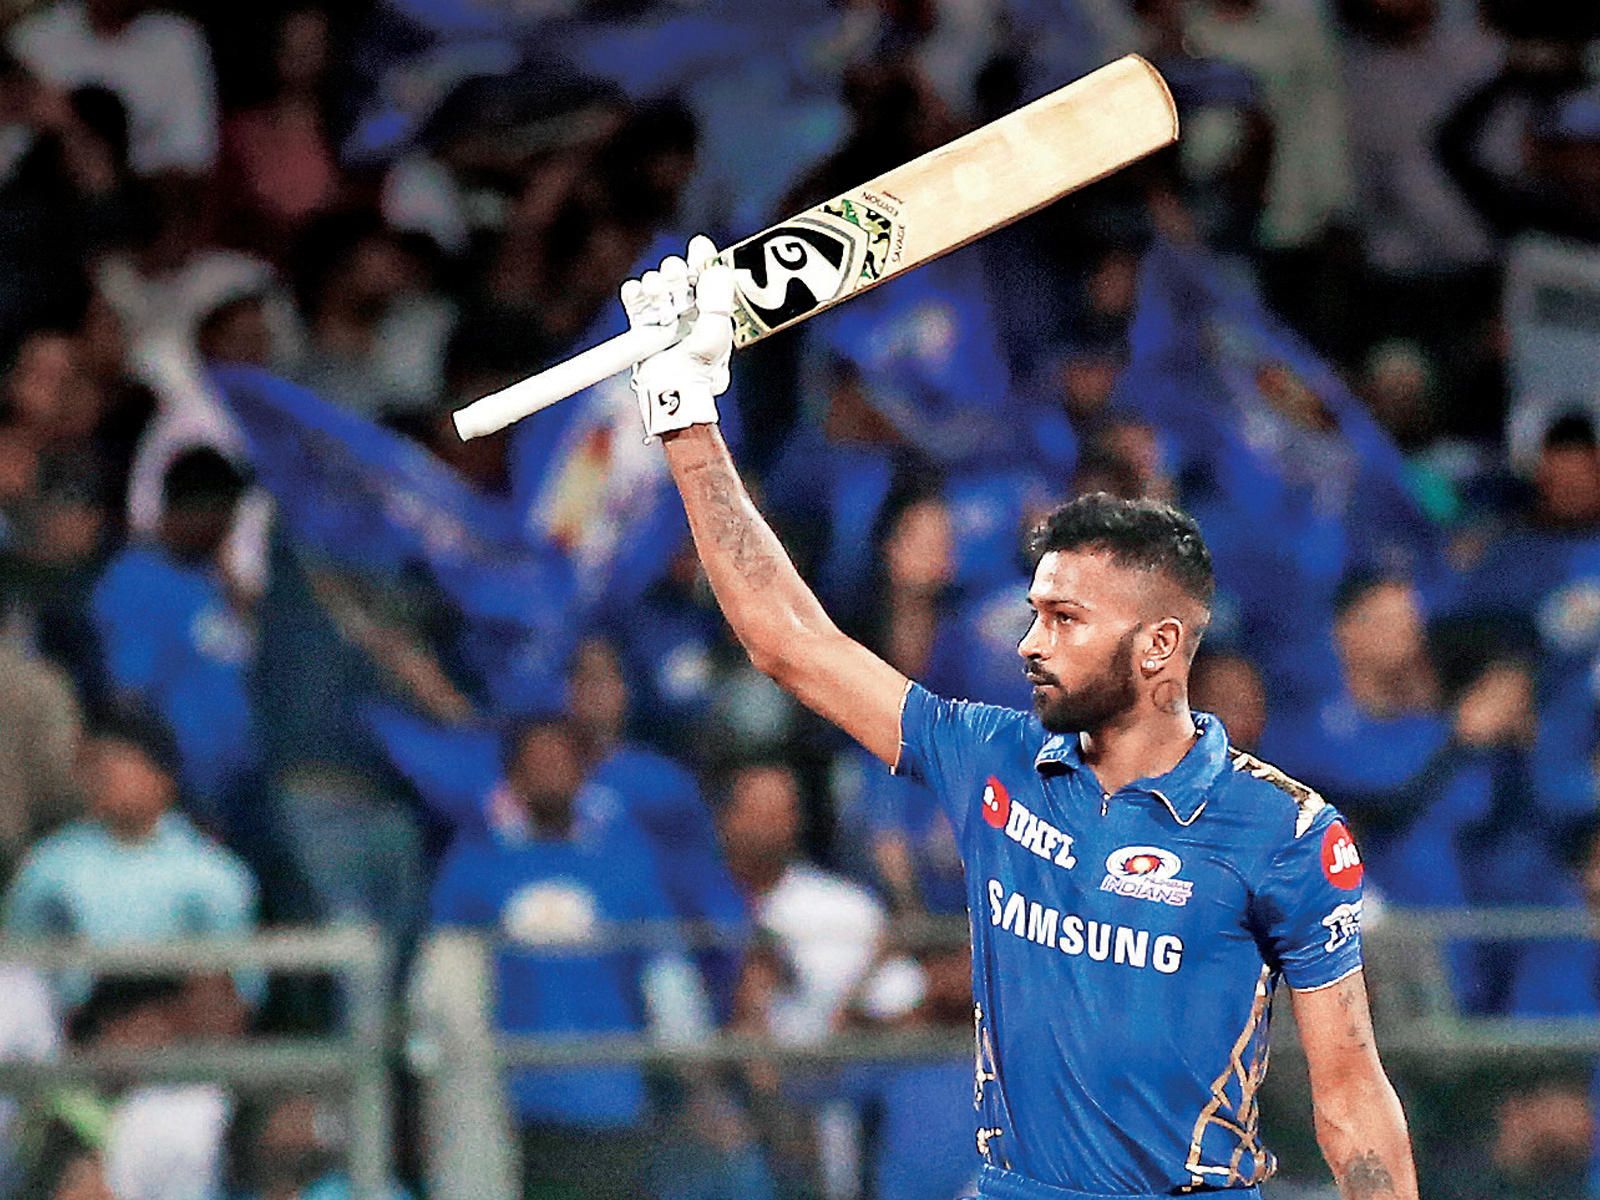 Ipl 2019: Hardik Pandya Says MS Dhoni Liked The All Rounder's Style Of Playing The Helicopter Shot